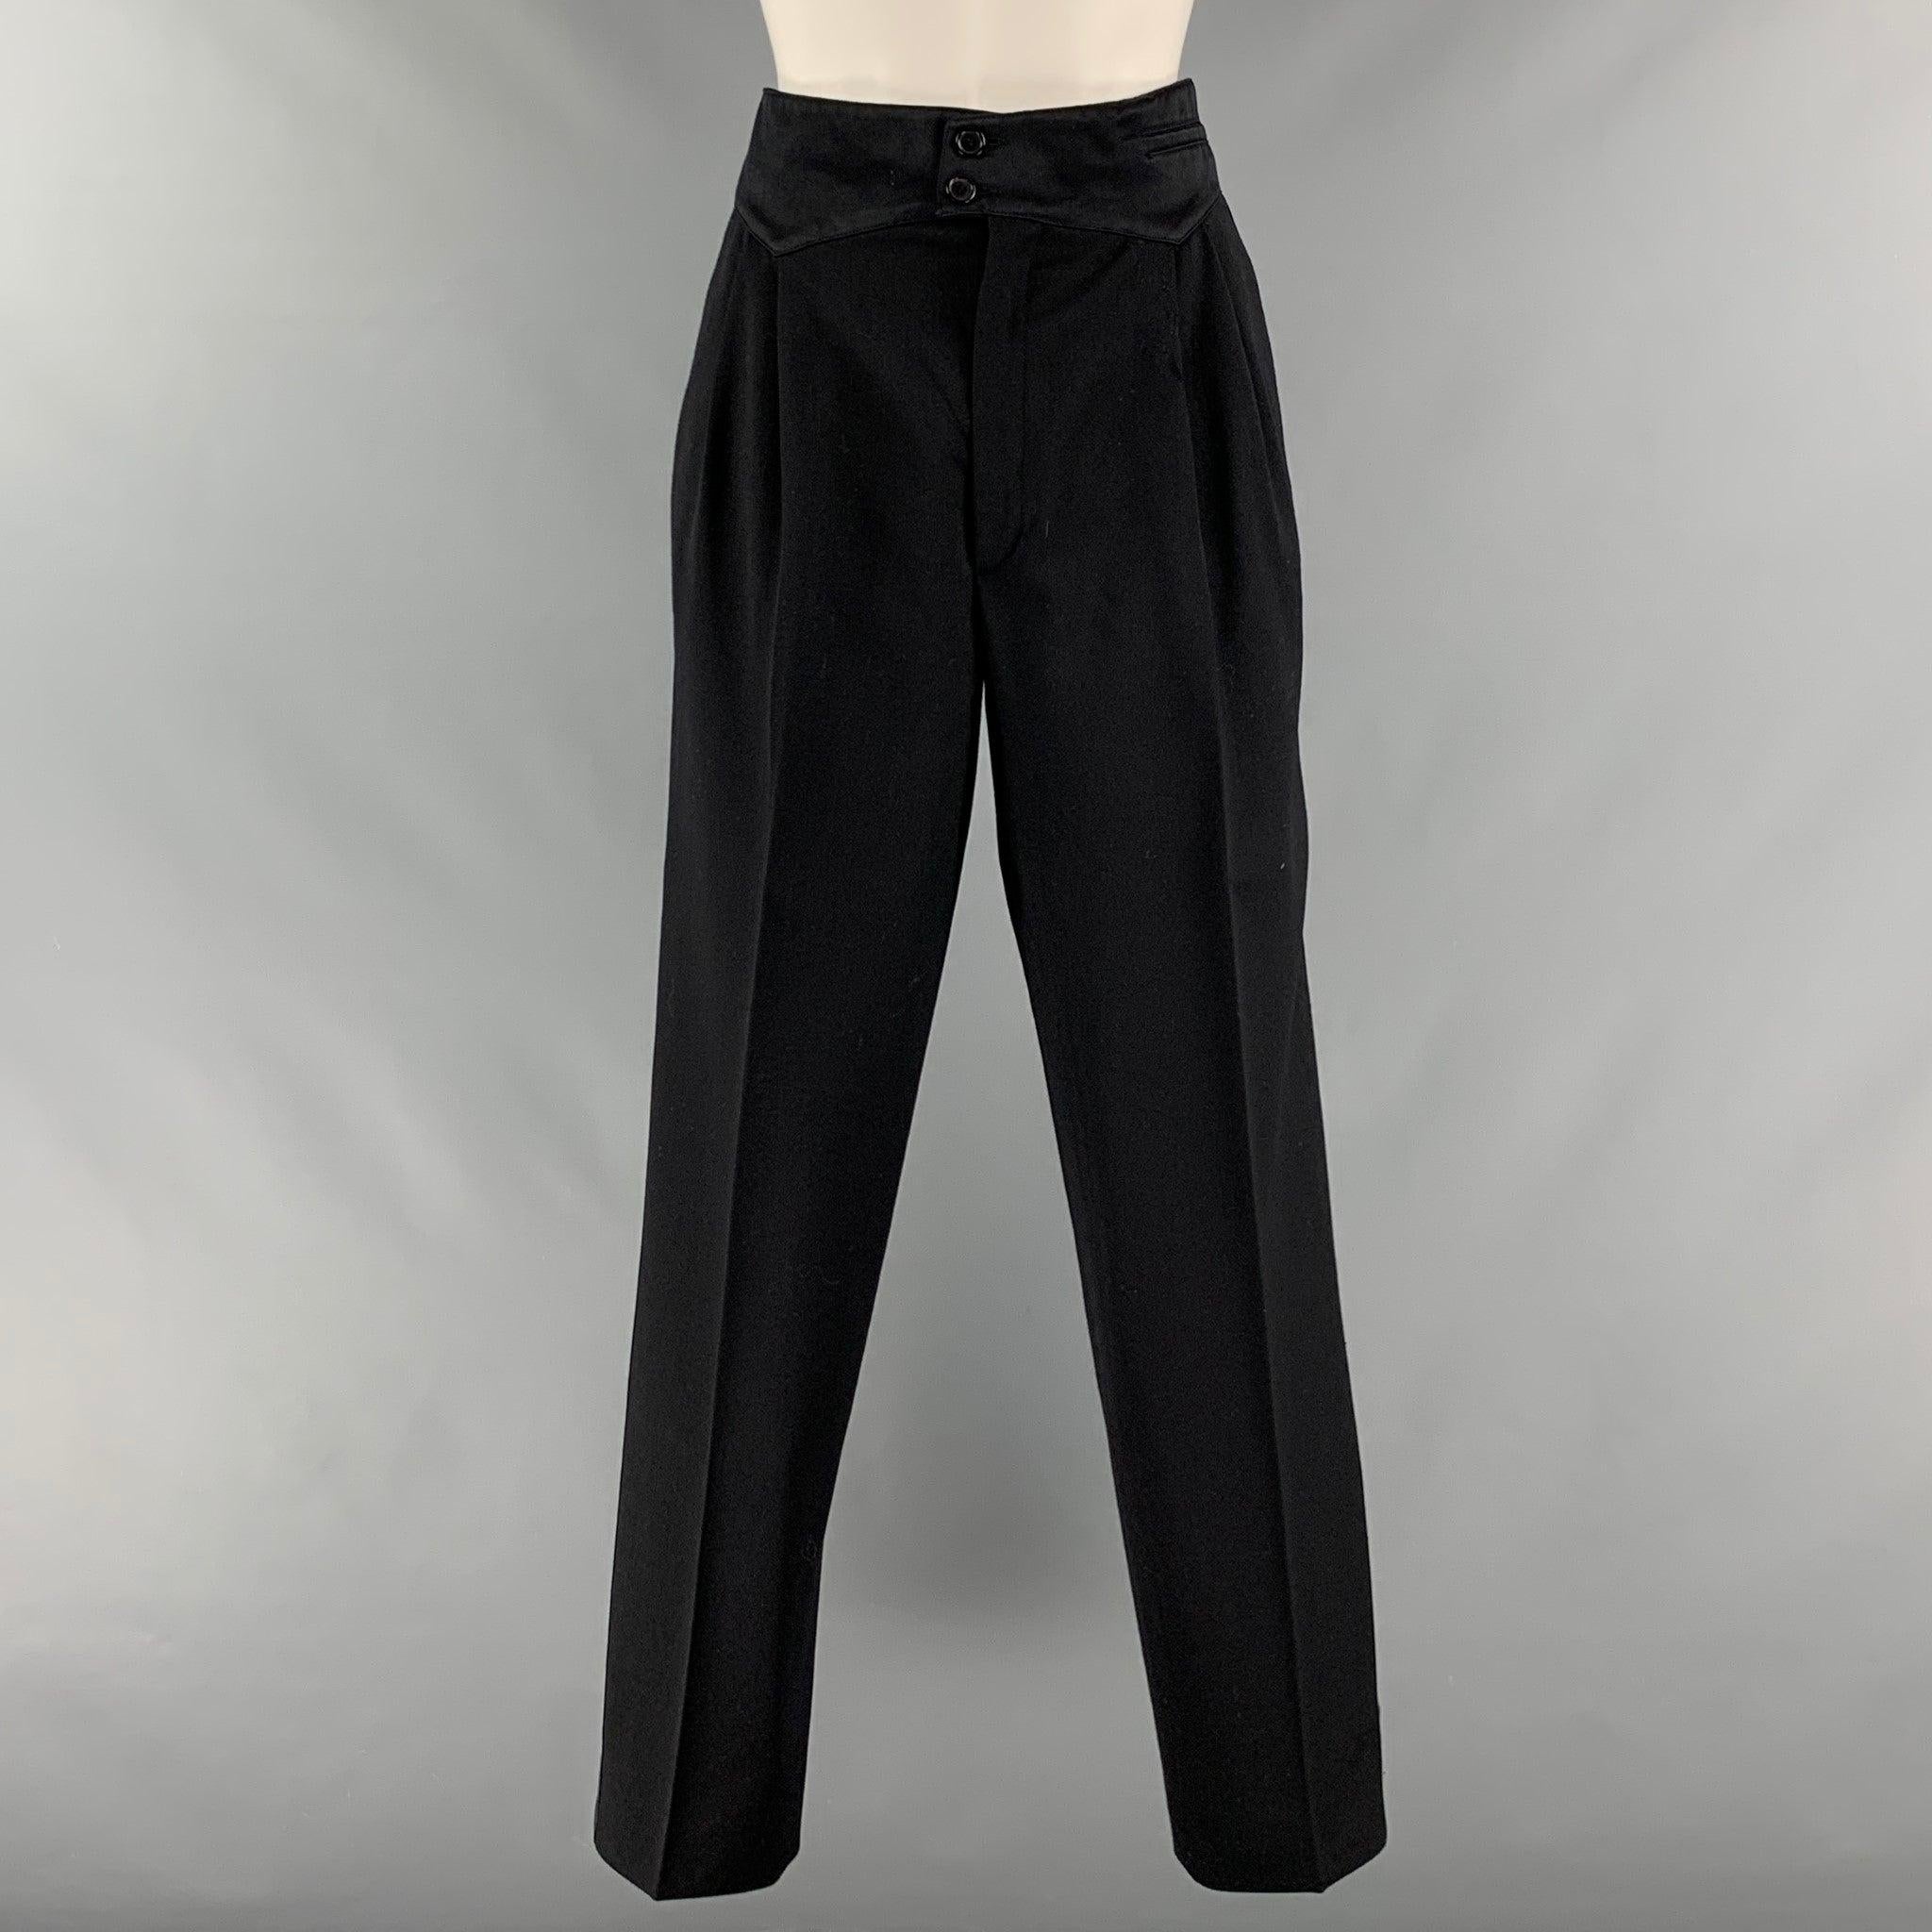 CLAUDE MONTANA Size 12 Black Silk Double Breasted Pants Suit For Sale 2